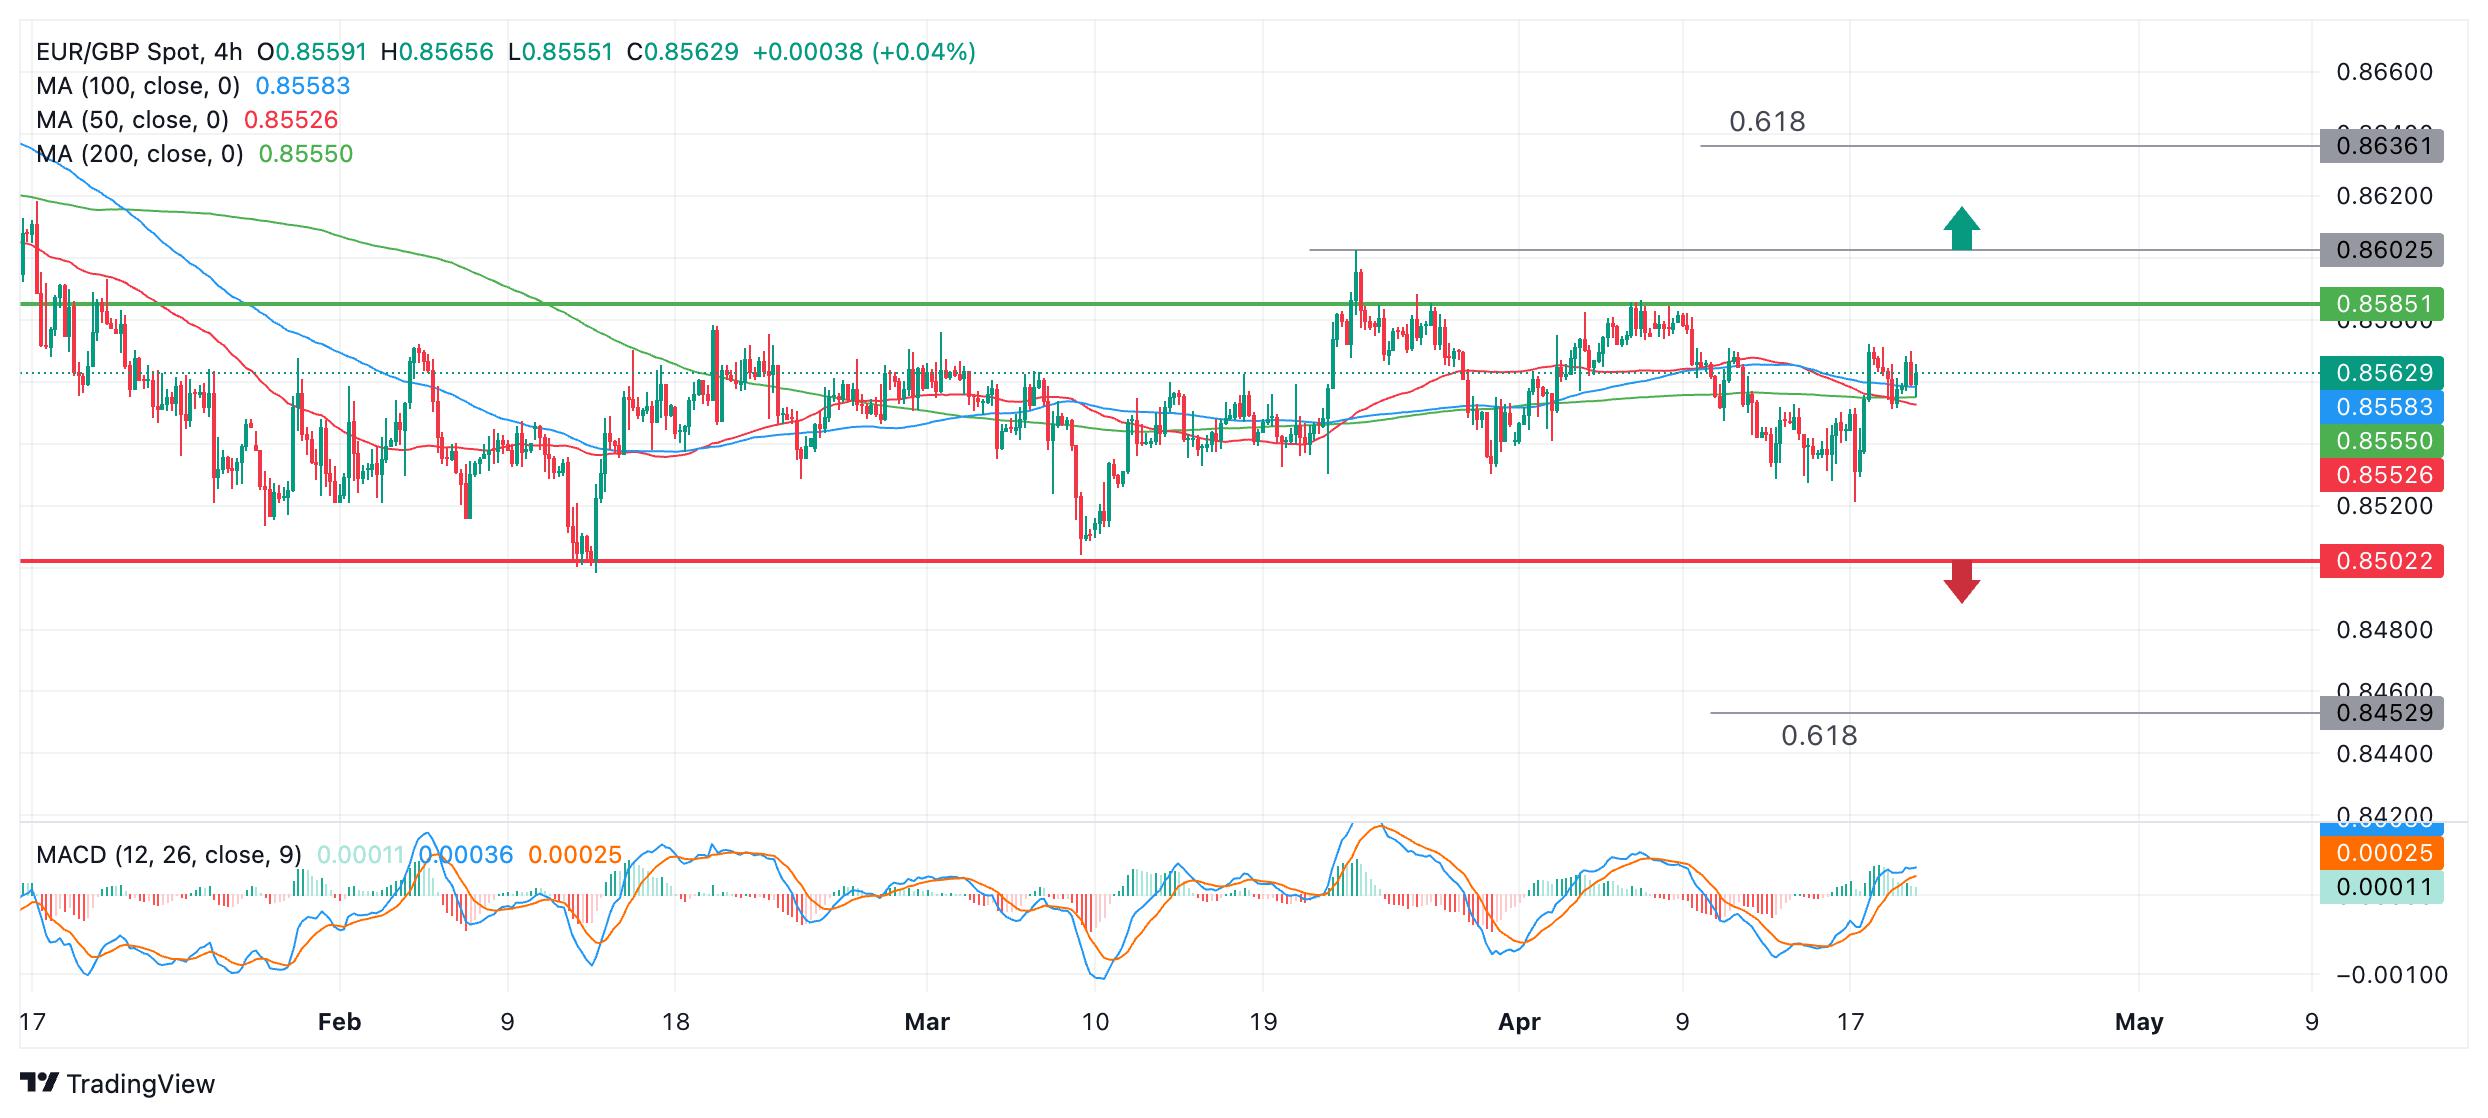 EUR/GBP Price Analysis: What are the breakout levels of the three-month range?